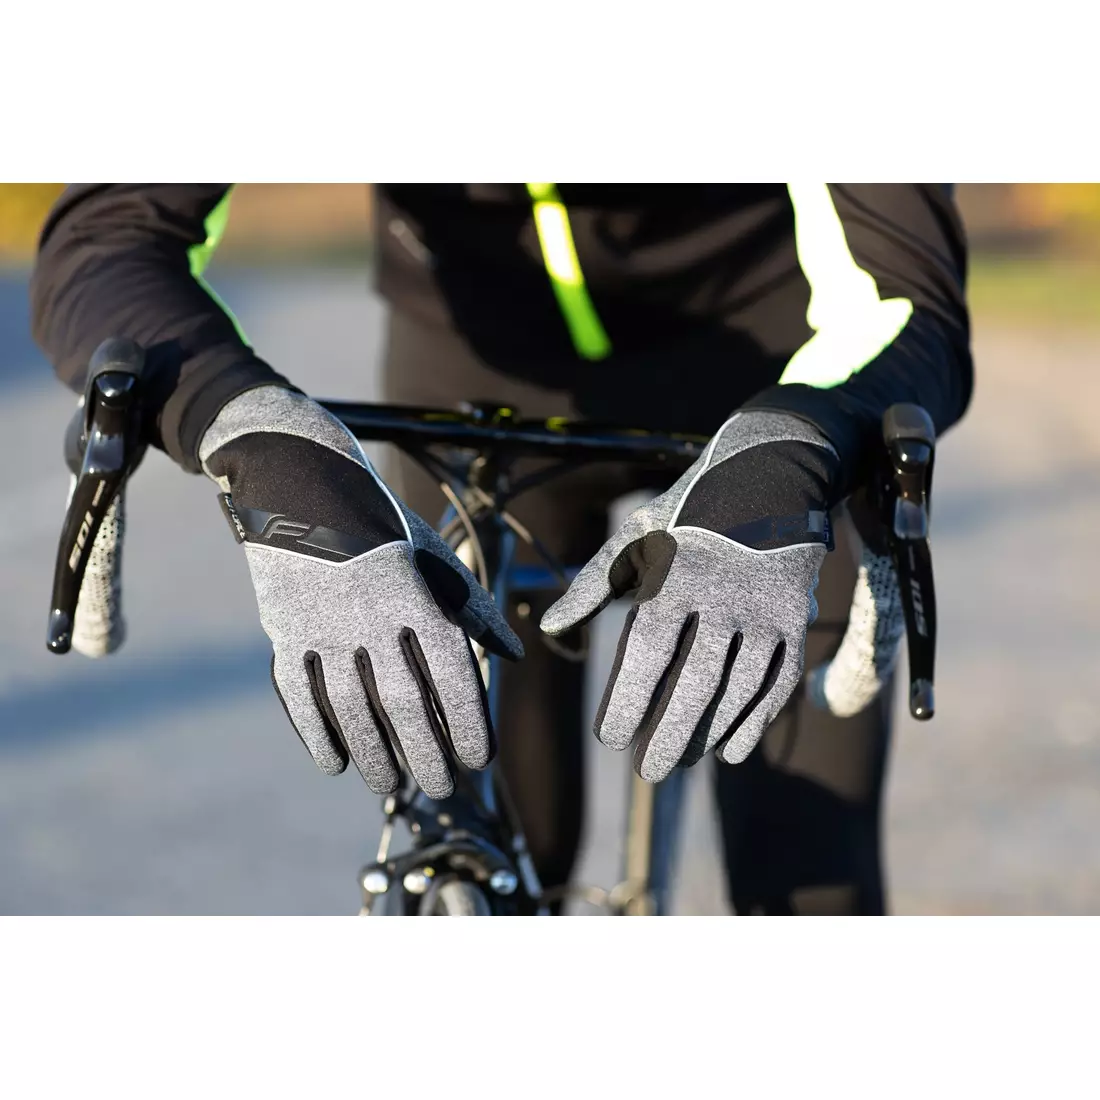 FORCE cycling gloves softshell GALE grey 9056953